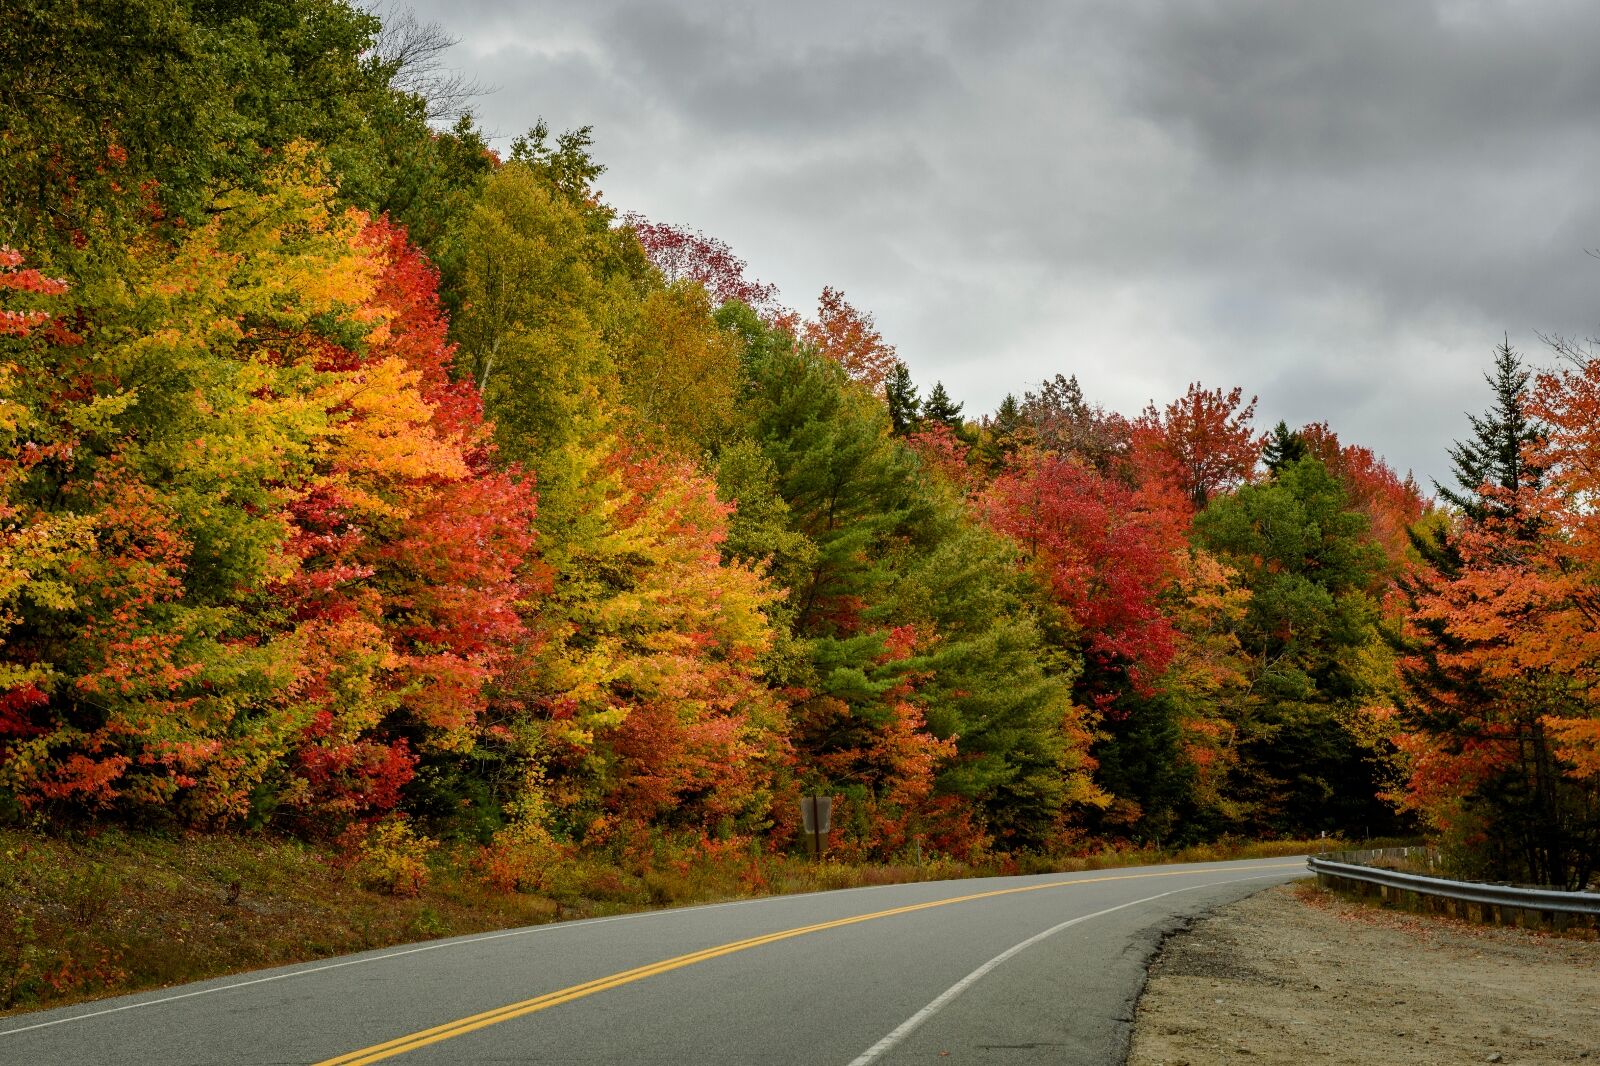 Kancamagus highway one of the best fall road trips in the US 